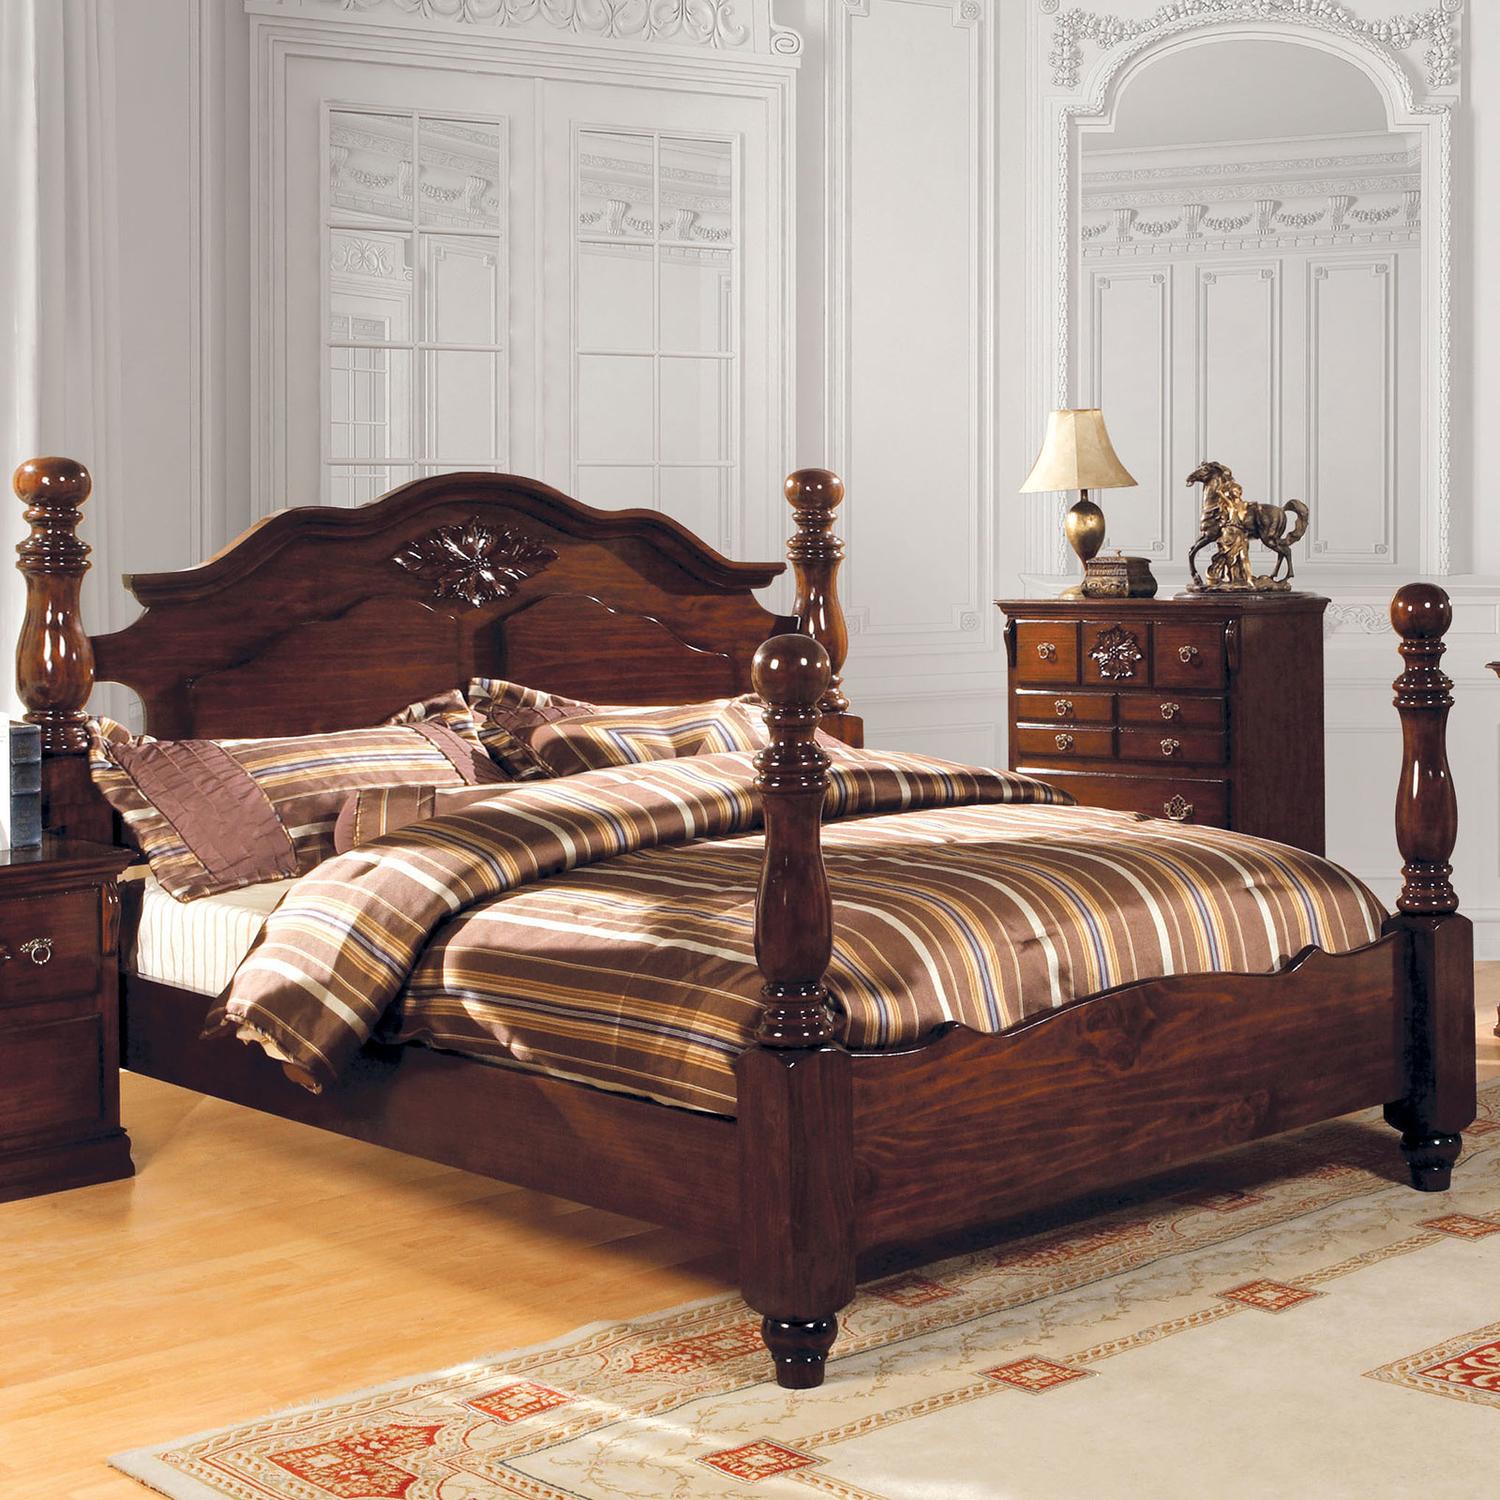 Traditional Poster Bed CM7571-CK Tuscan CM7571-CK in Cherry 